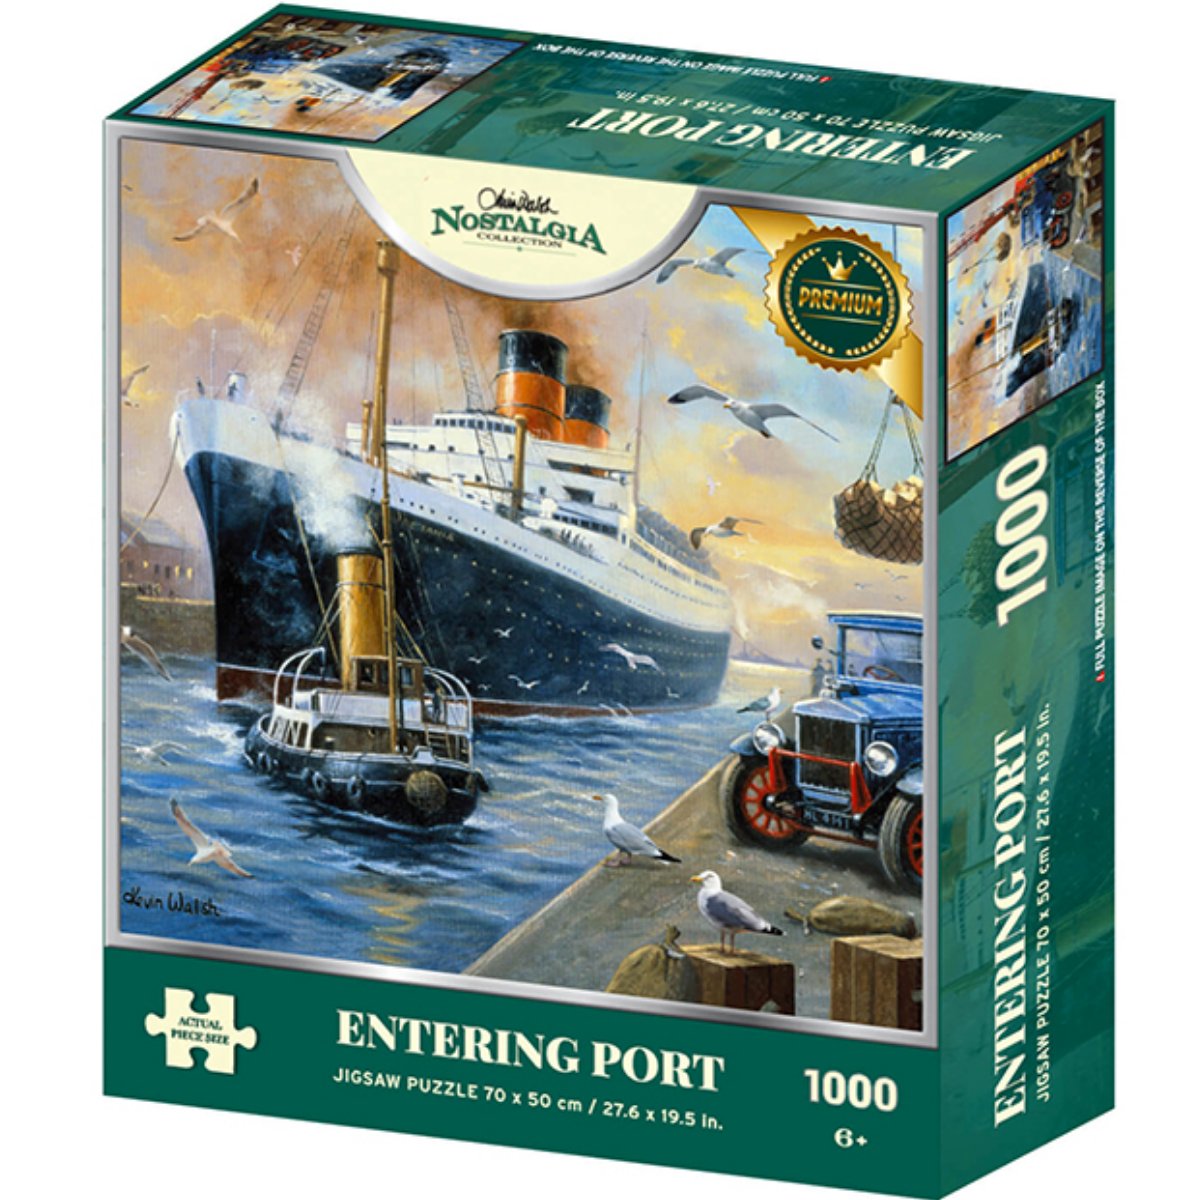 Entering Port - Kevin Walsh 1000 Piece Jigsaw Puzzle